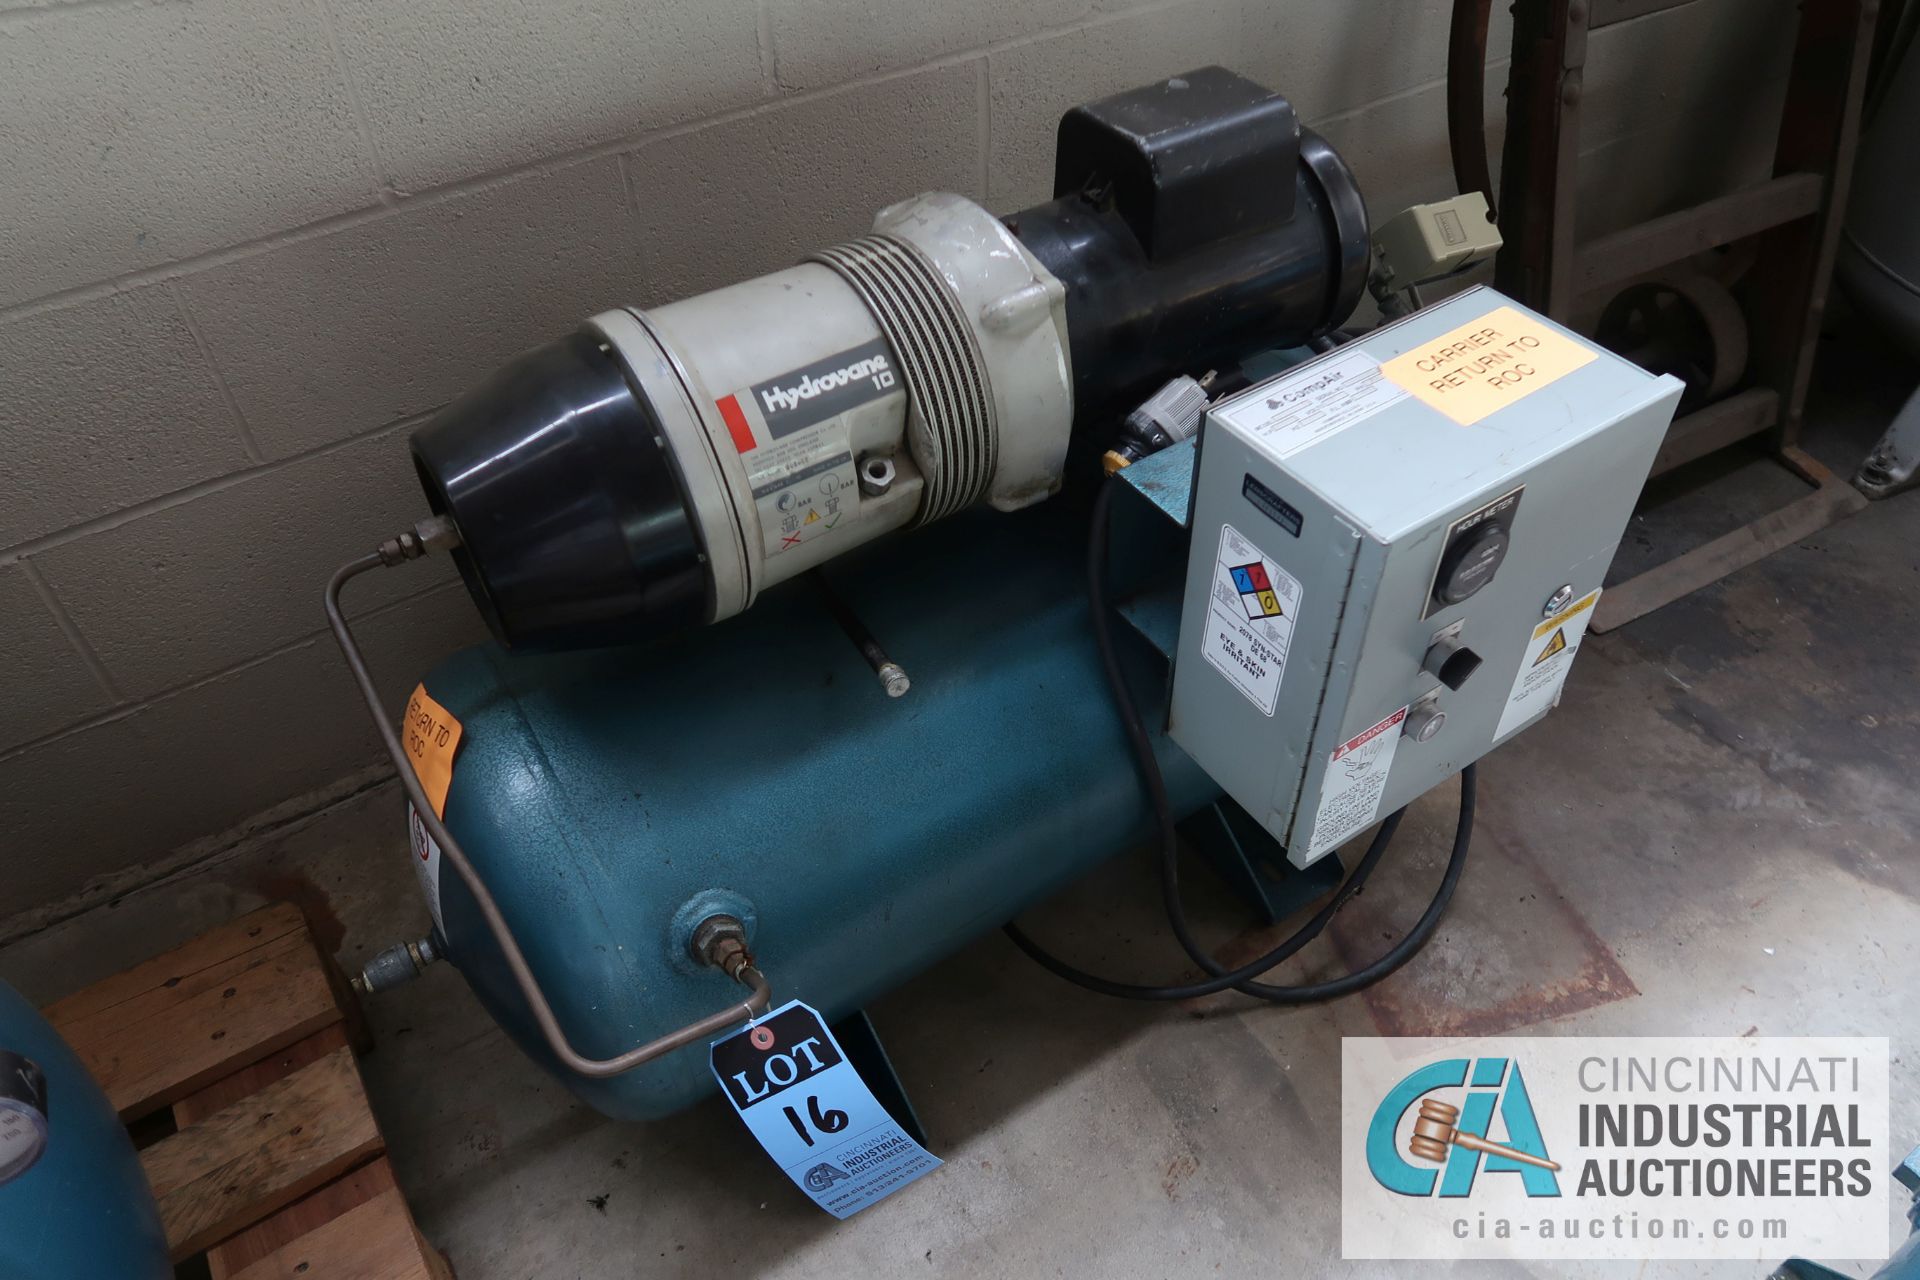 2 HP COMPAIR MODEL 10 PURS HORIZONTAL TANK AIR COMPRESSOR; S/N 010-000758, 3 PHASE, 230 VOLTS, HOURS